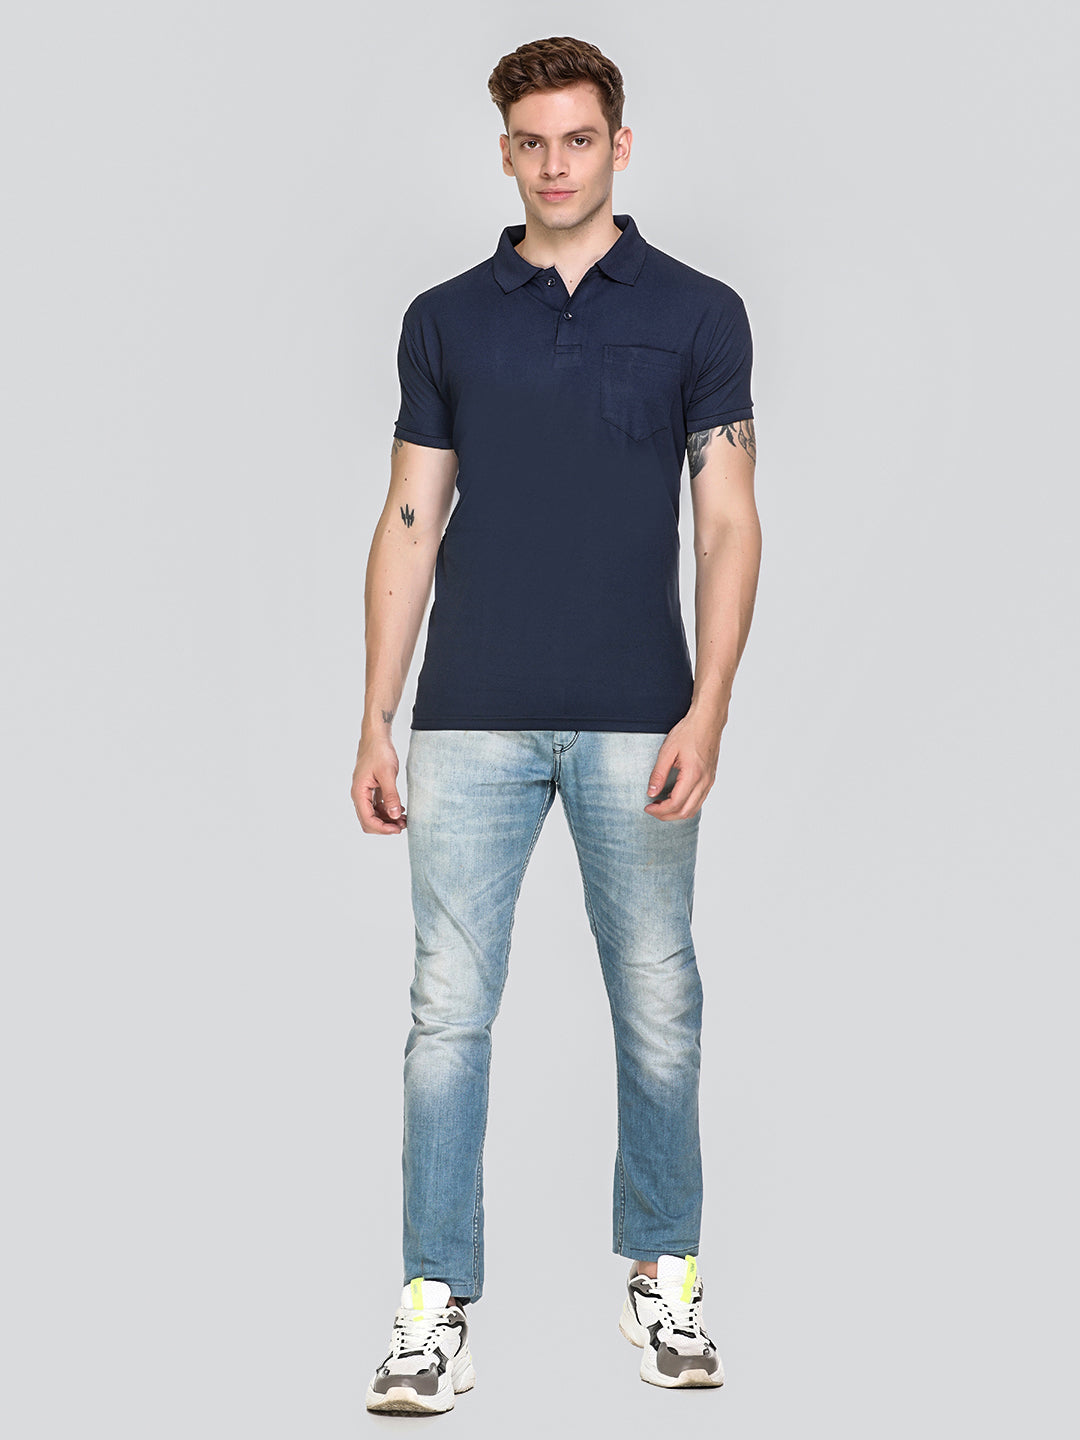 Comfortable Jinxer Navy Blue Dry Fit Polo Neck T Shirt for men online in India